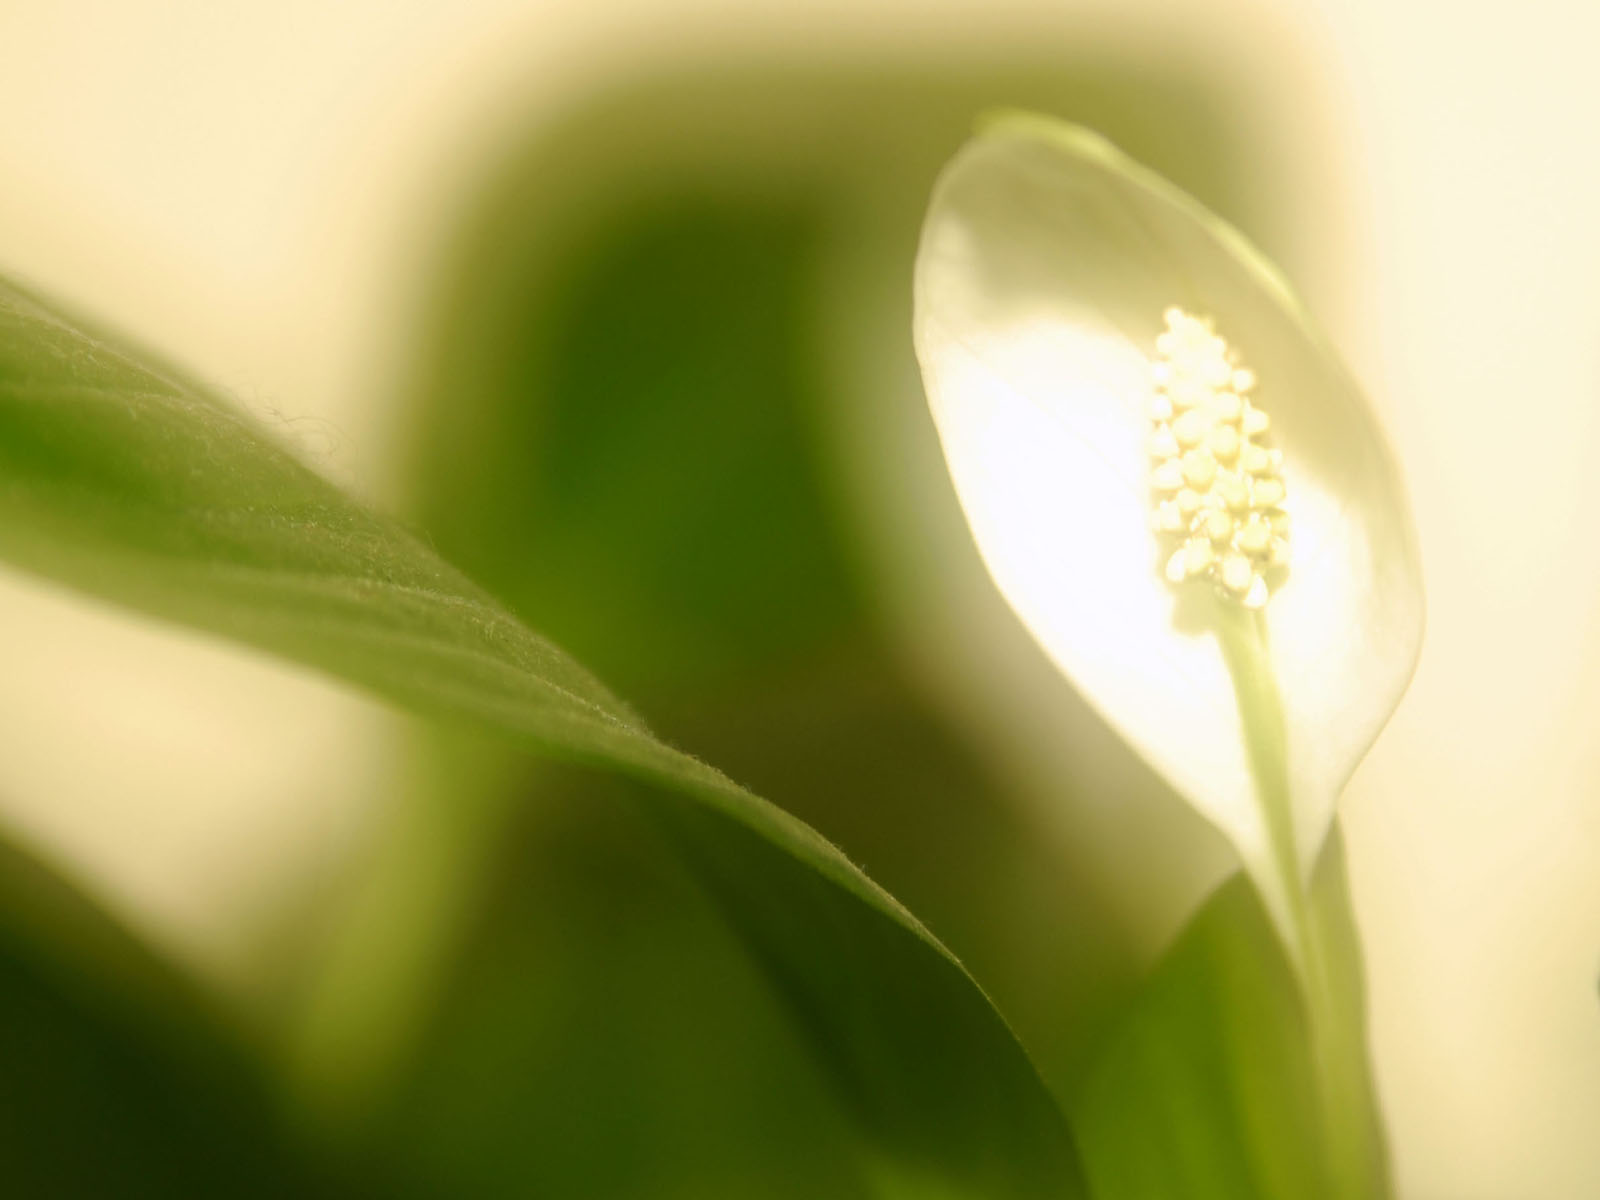 Tag Peace Lilies Wallpaper Image Photos And Pictures For